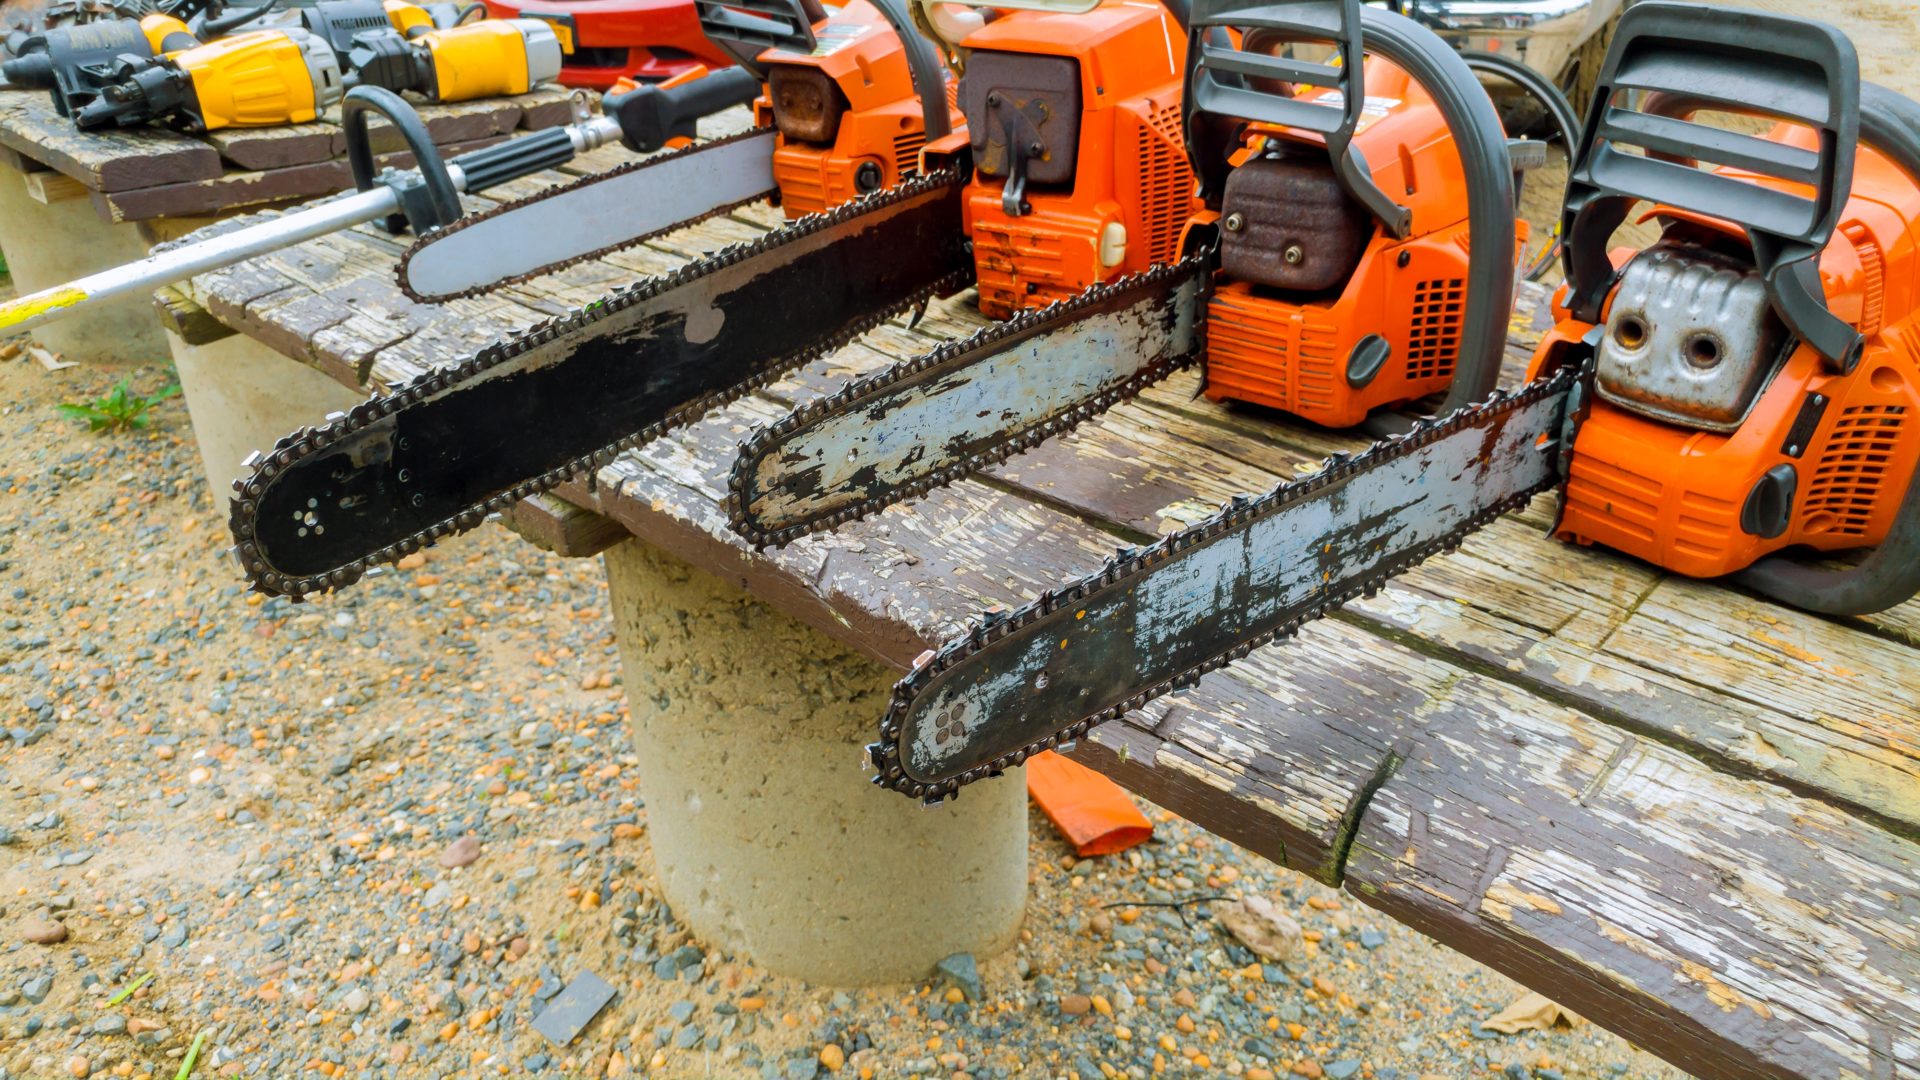 How Big of a Chainsaw Do I Need? Find the Perfect Size for Your Projects